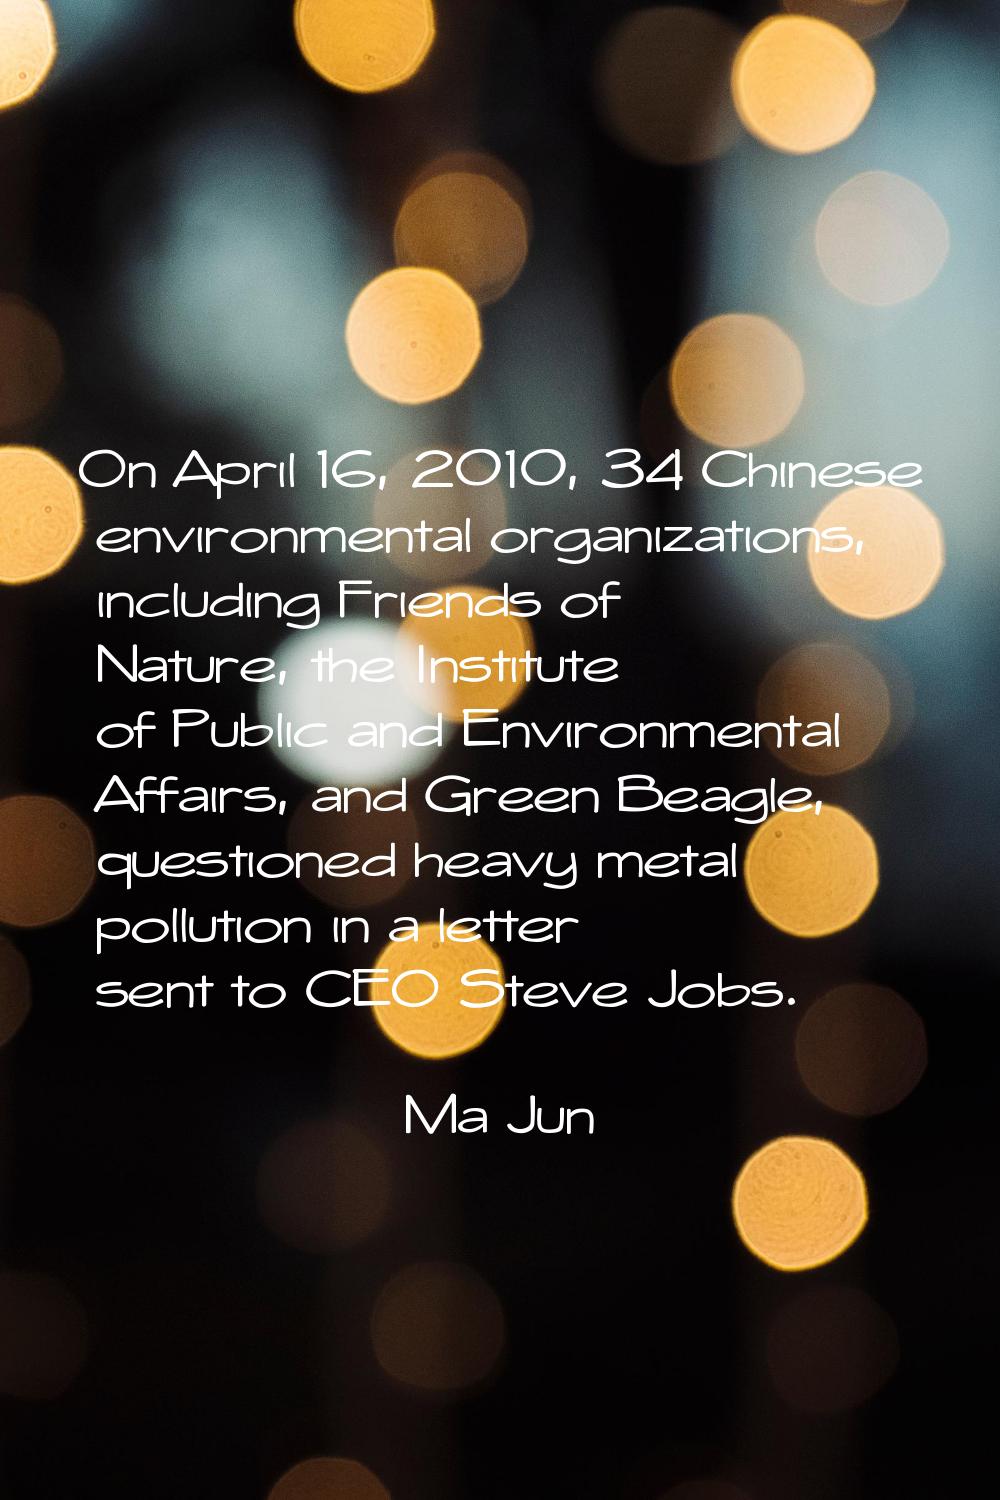 On April 16, 2010, 34 Chinese environmental organizations, including Friends of Nature, the Institu